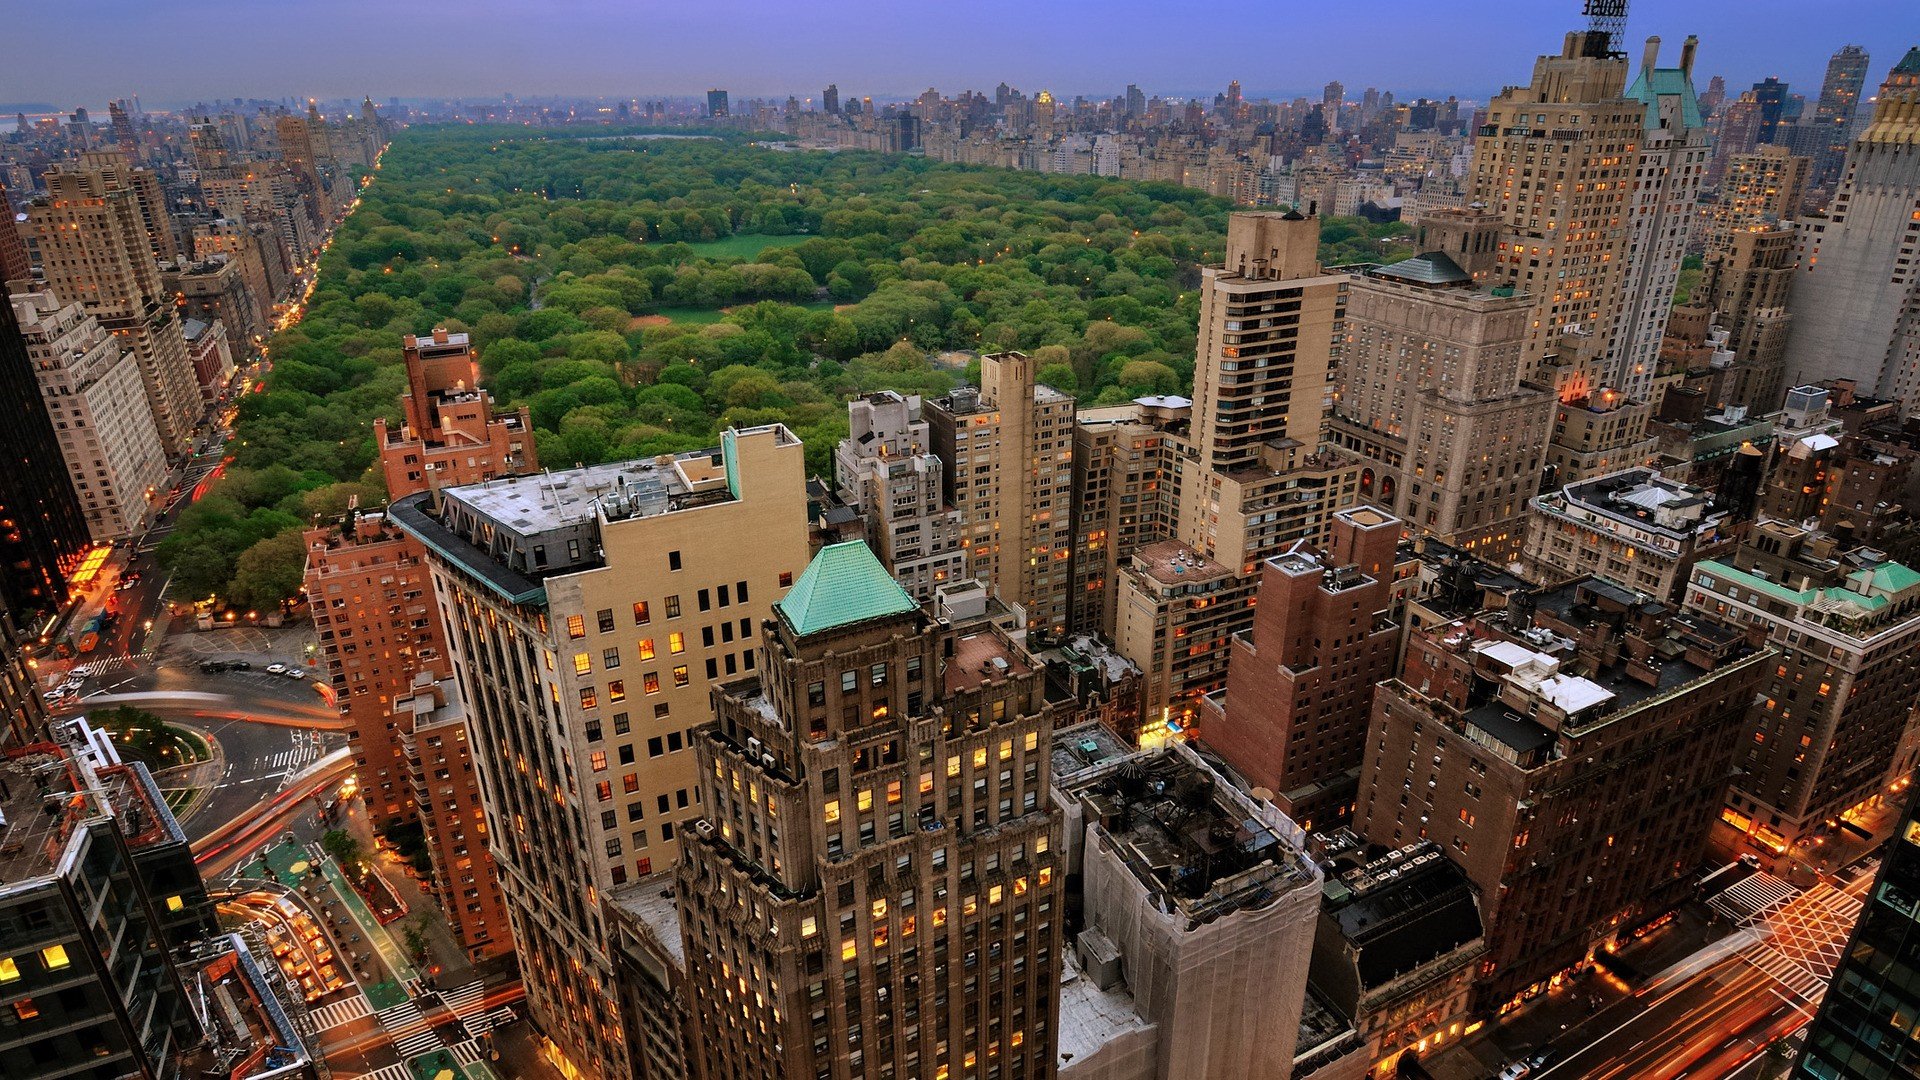 landscapes, Cityscapes, Architecture, New, York, City, Manhattan, Skyscrapers, Central, Park Wallpaper